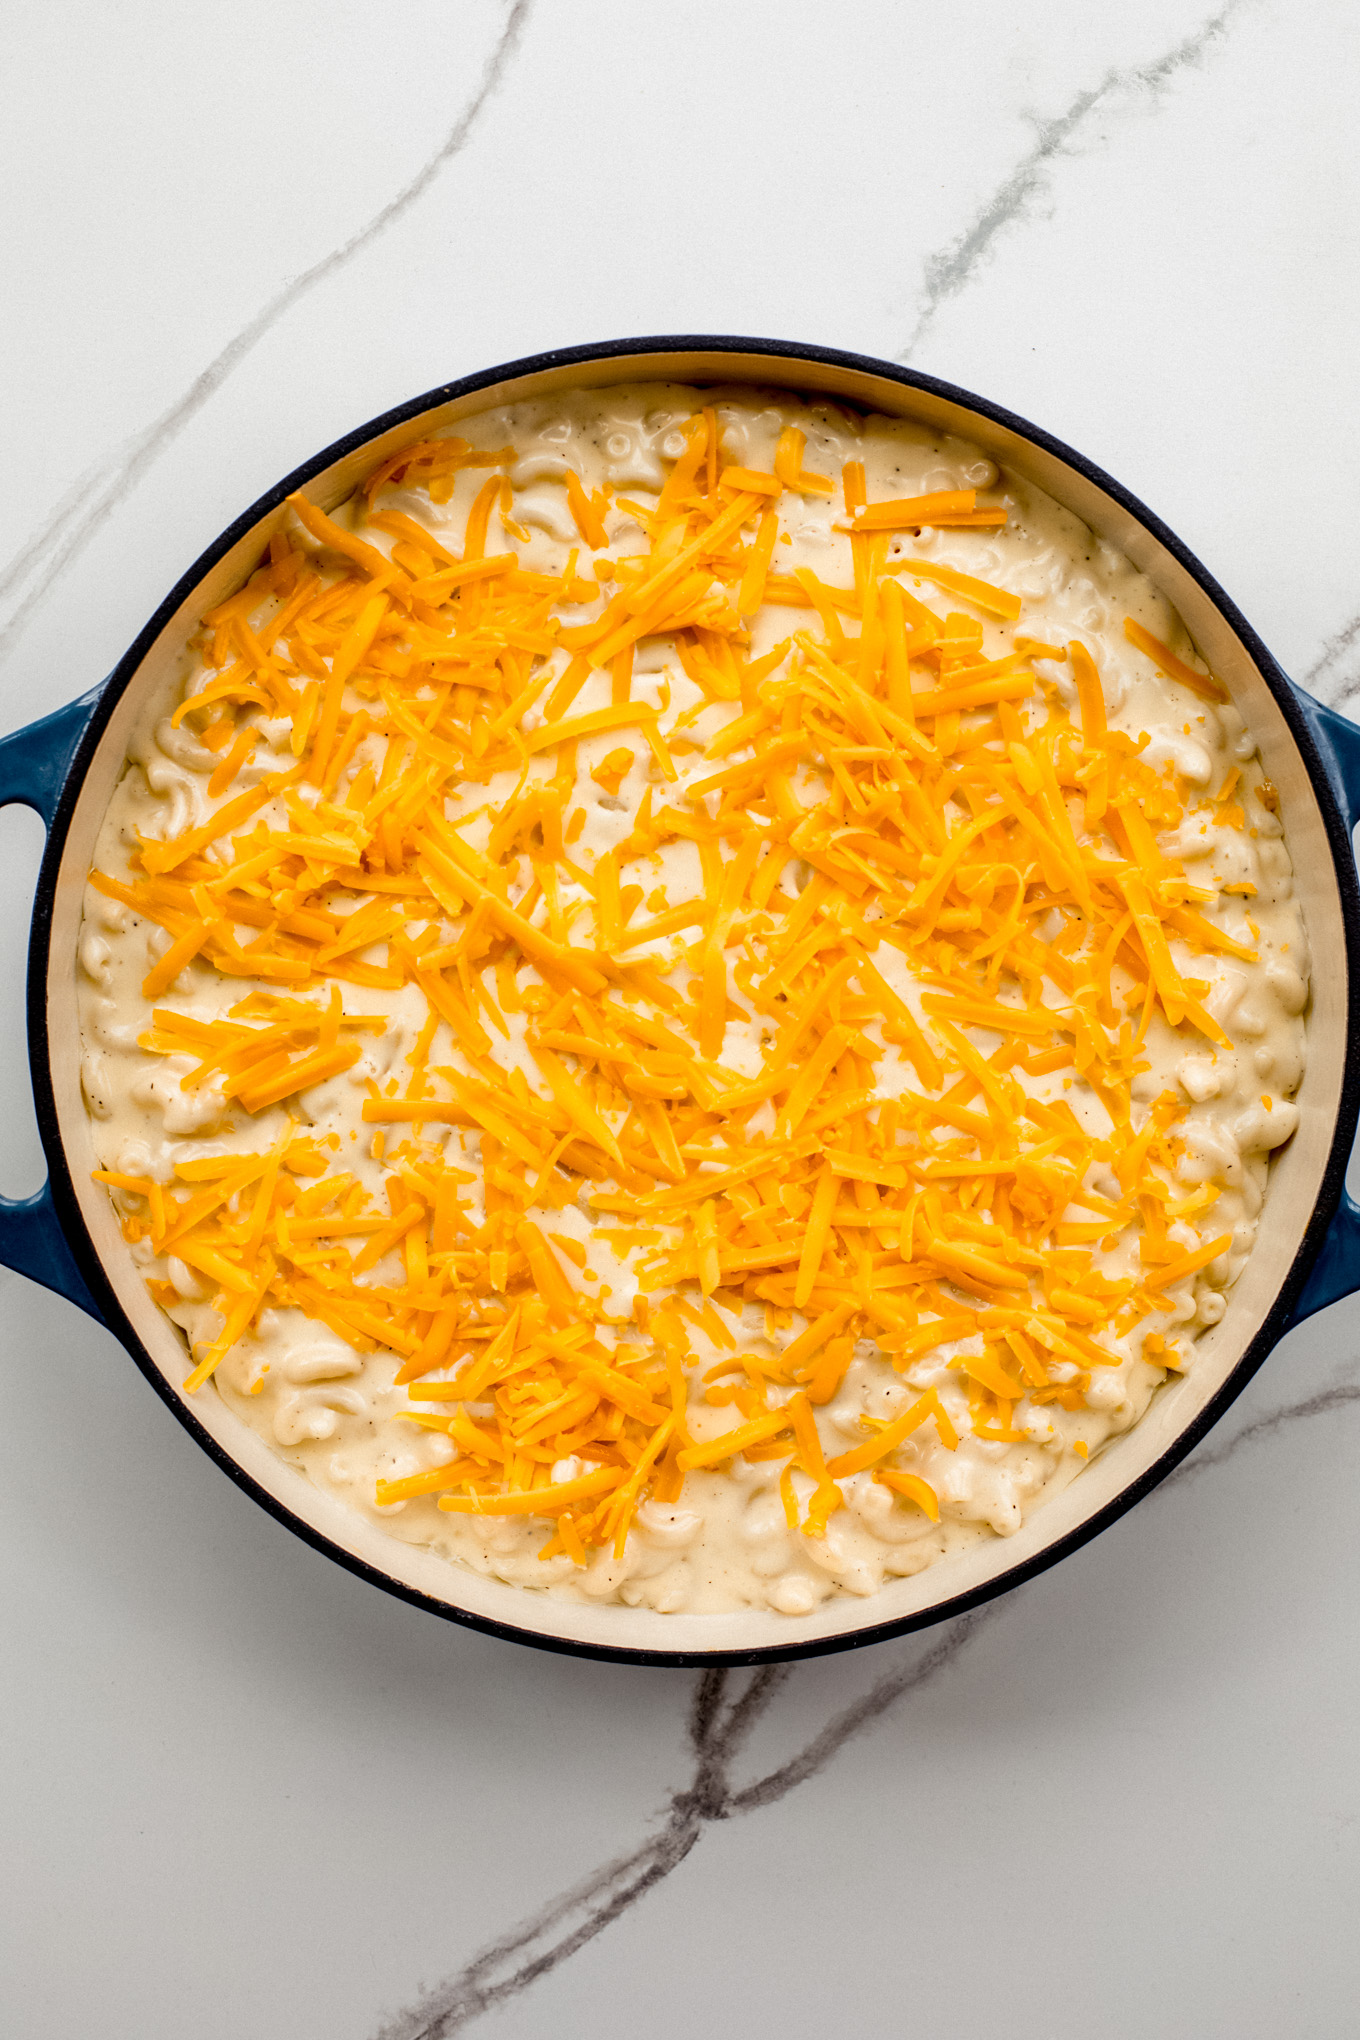 baked macaroni in a cast-iron skillet topped with shredded cheddar cheese.